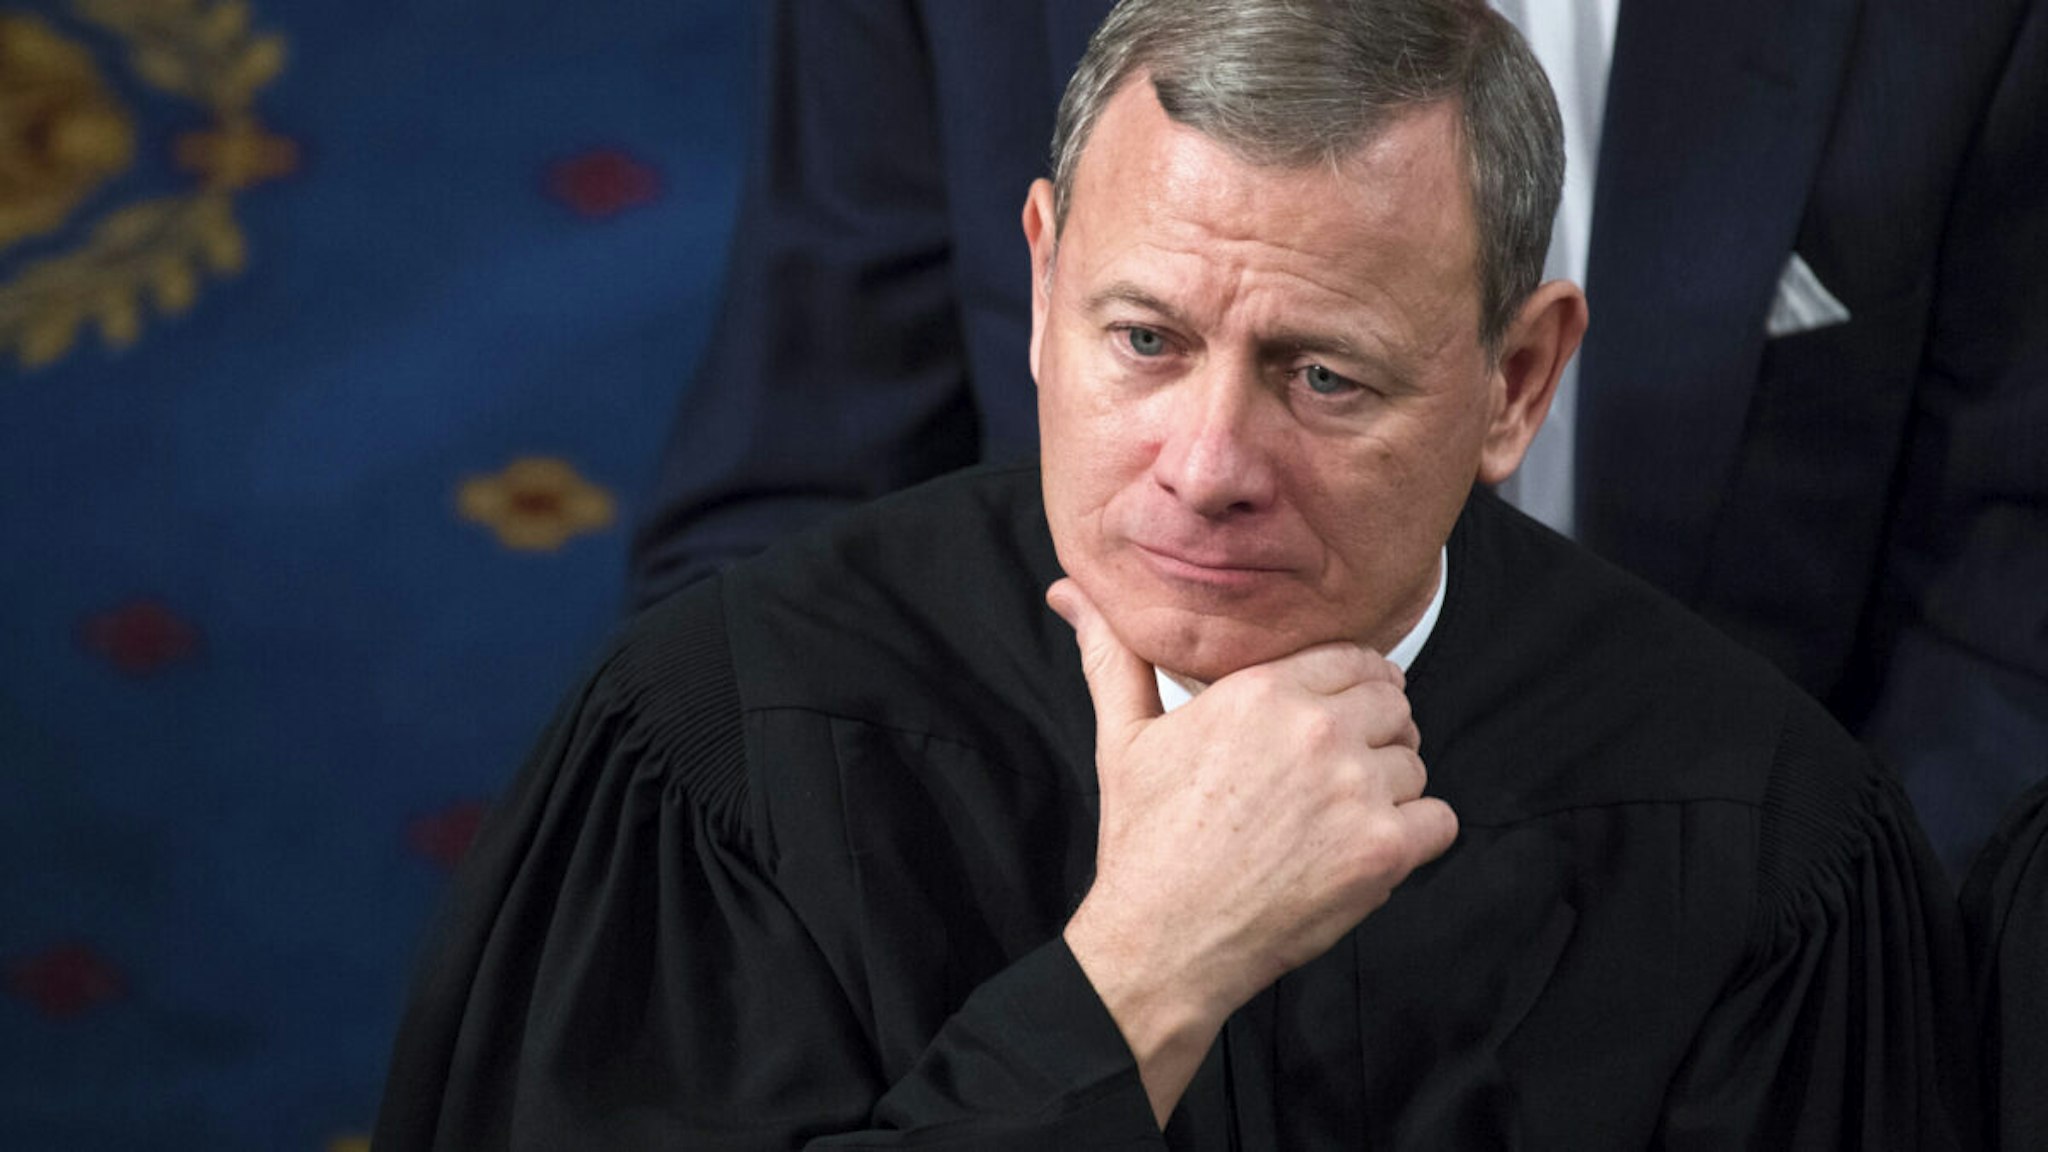 UNITED STATES - JANUARY 30: Supreme Court Chief Justice John Roberts listens to President Donald Trump's State of the Union address to a joint session of Congress on January 30, 2018.